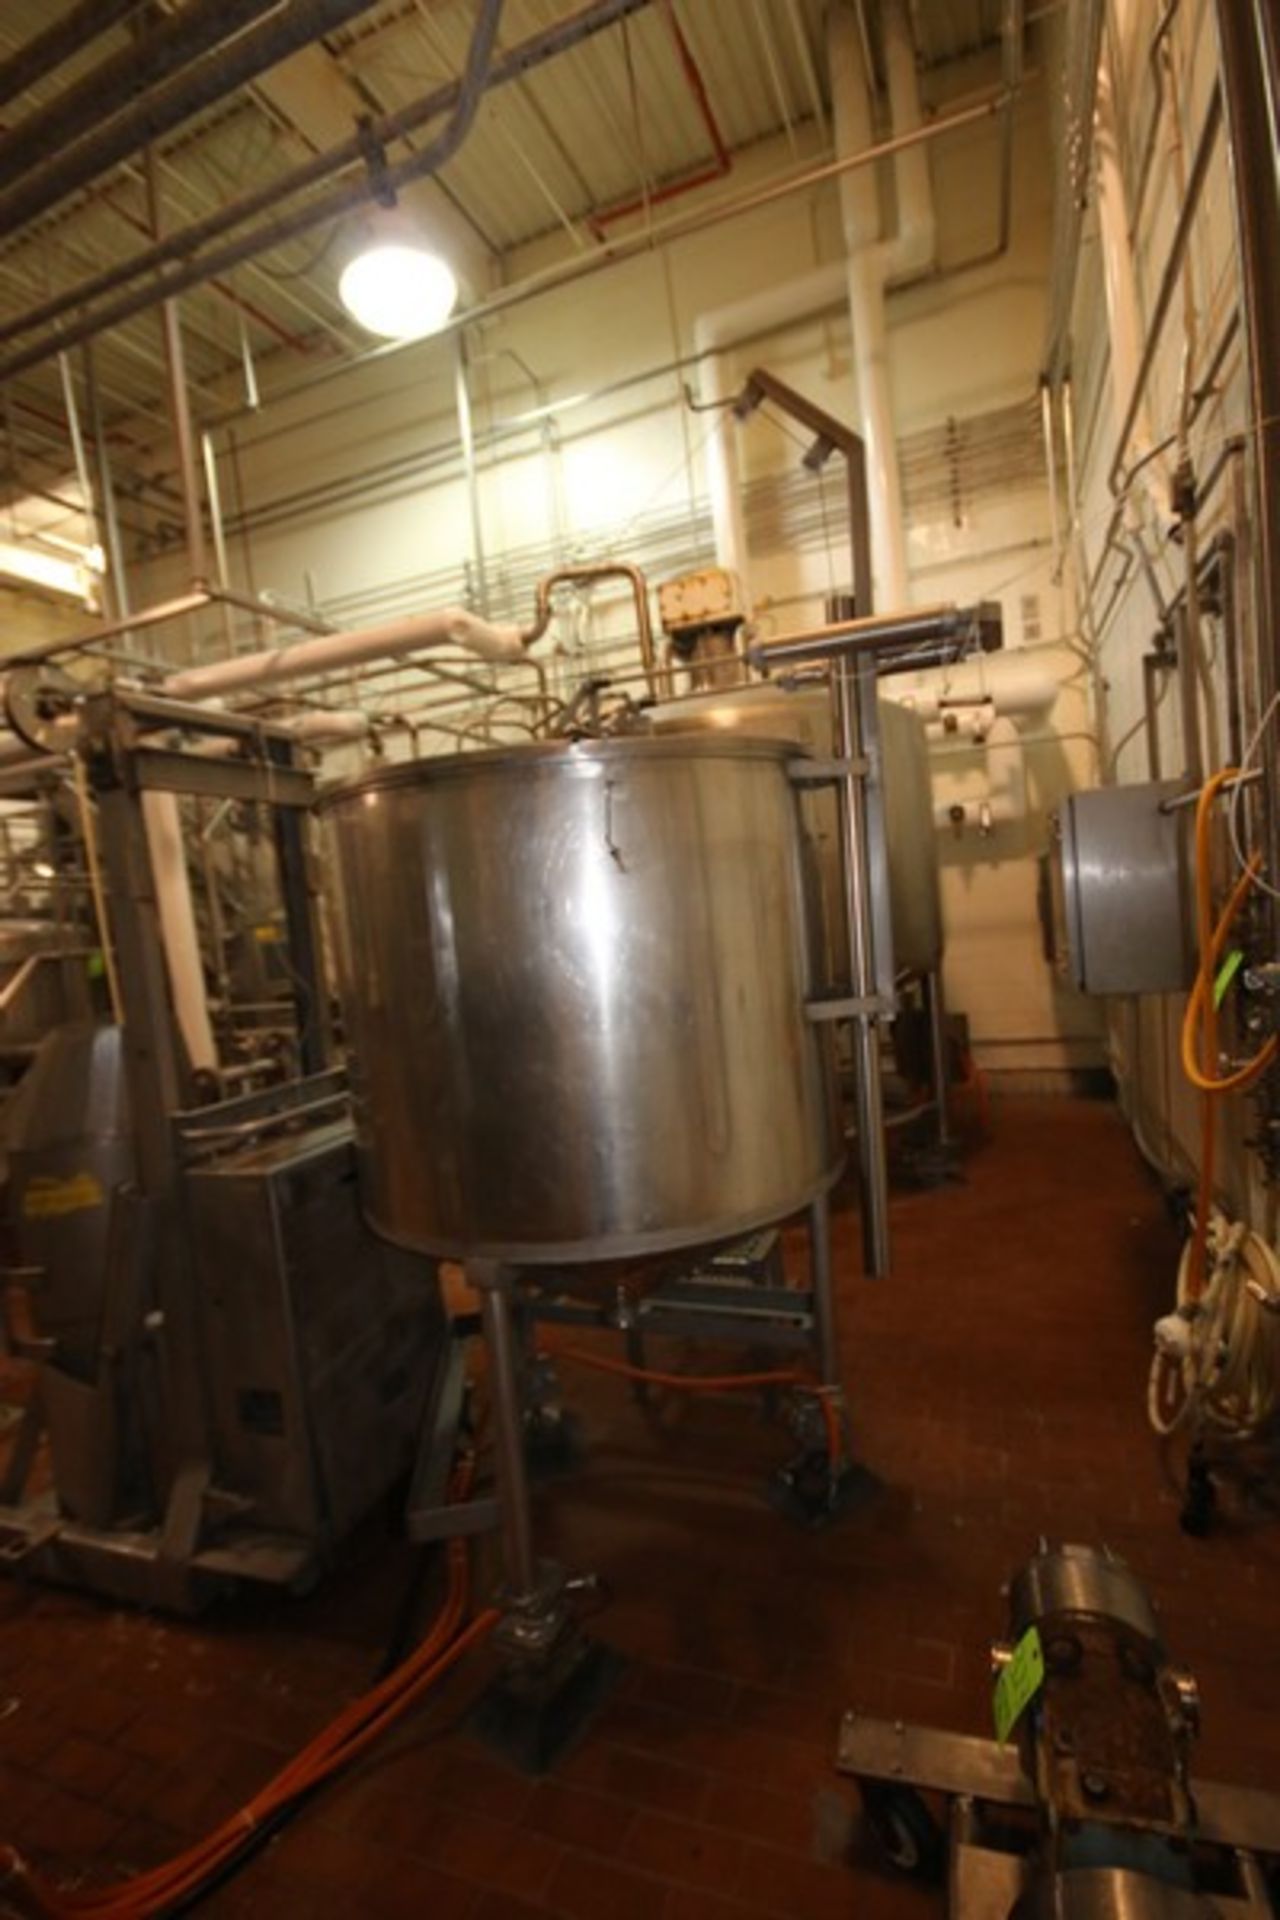 250 Gal. S/S Single Wall Vertical Tank, Internal Dims.: Aprox. 36" Tall x 48" Dia., with Cylinder - Image 3 of 10